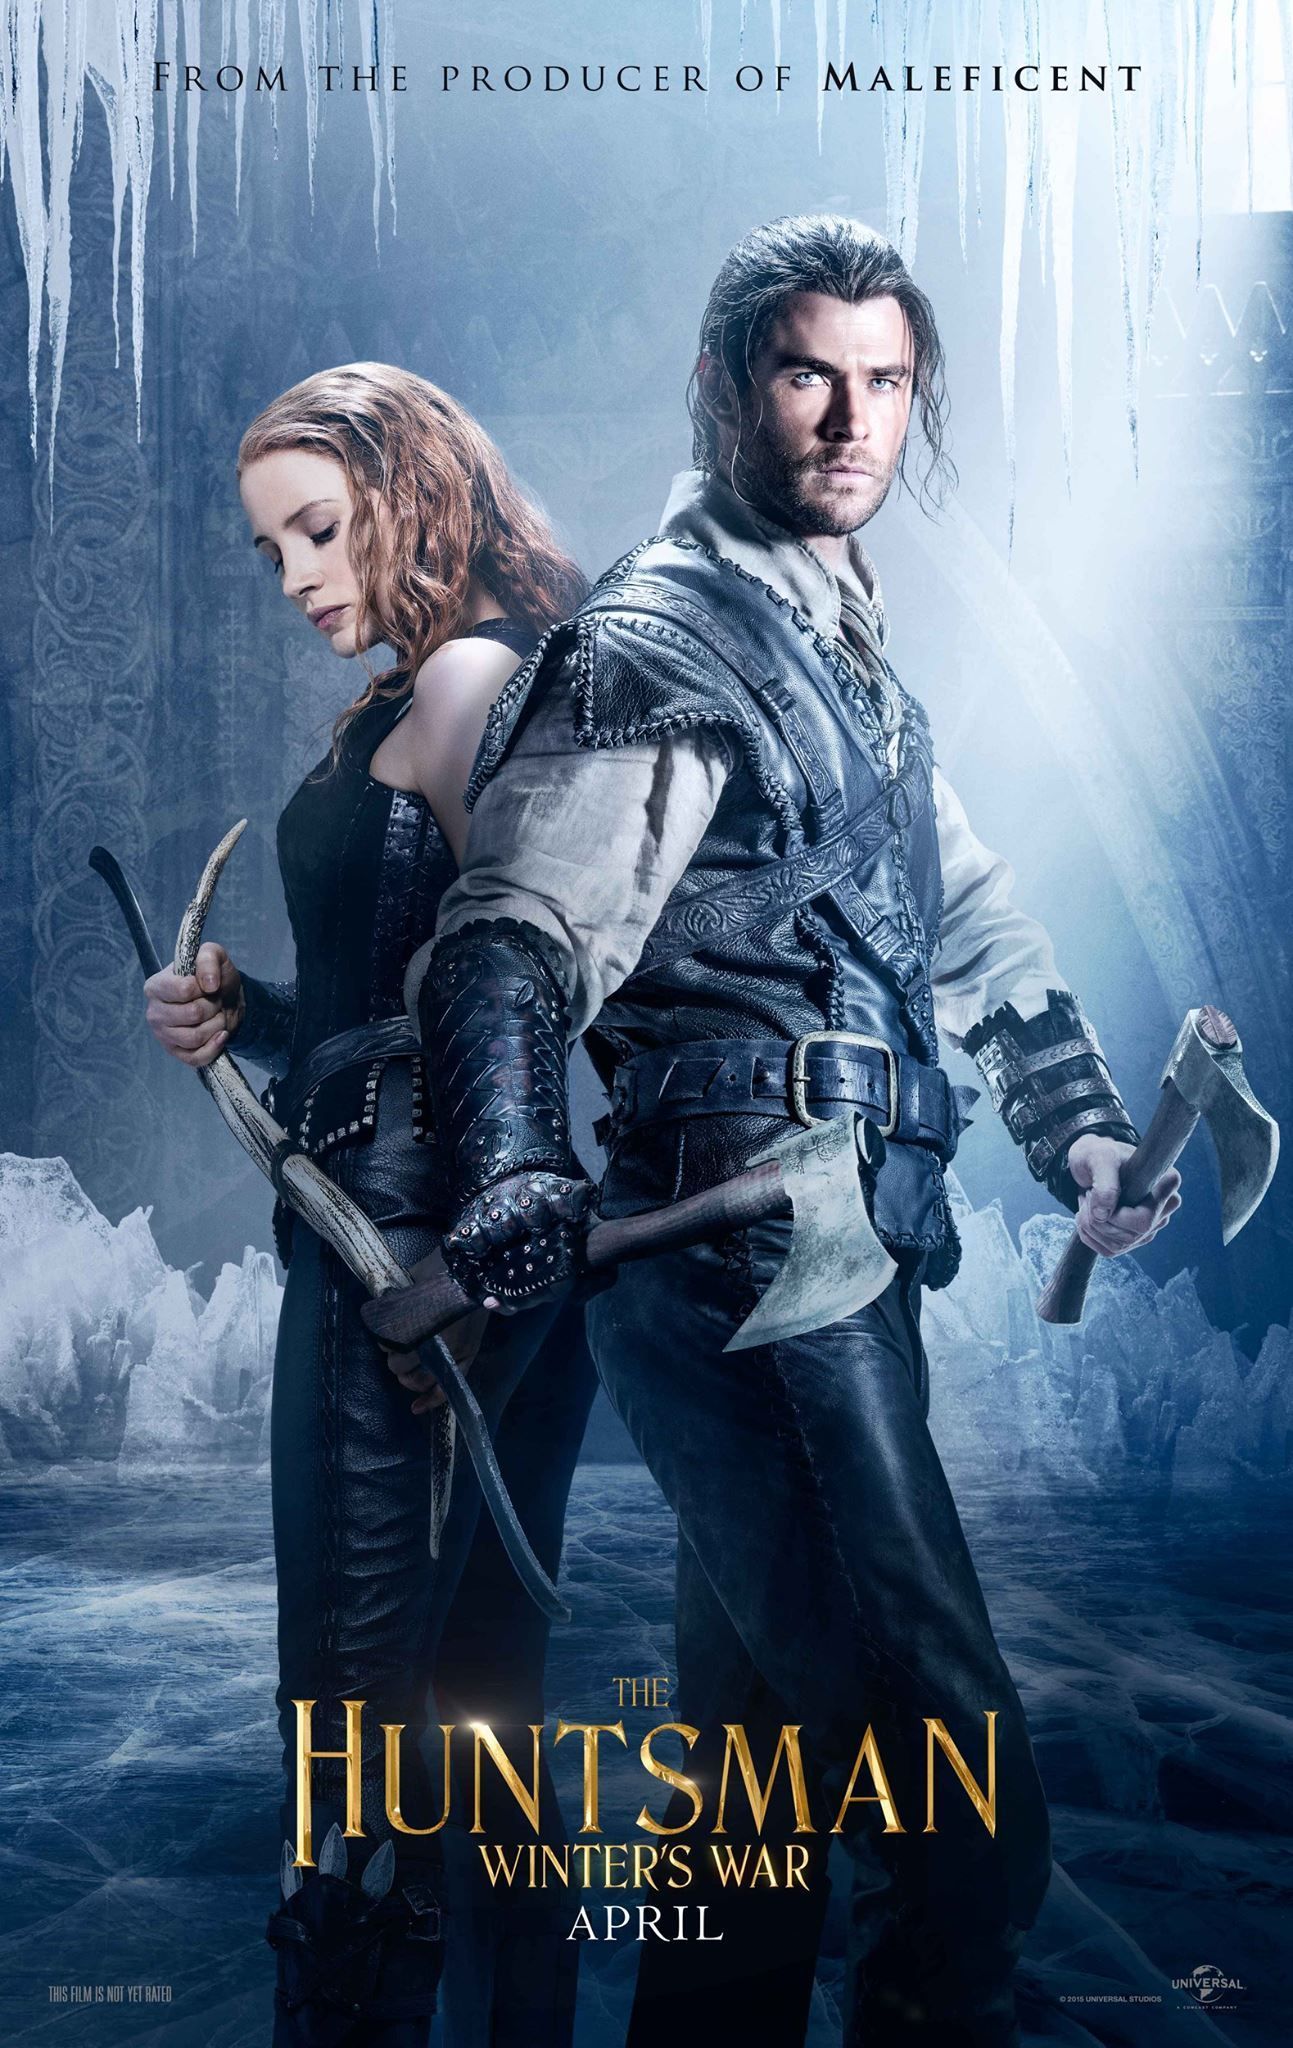 The Huntsman Poster - Jessica Chastain and Chris Hemsworth